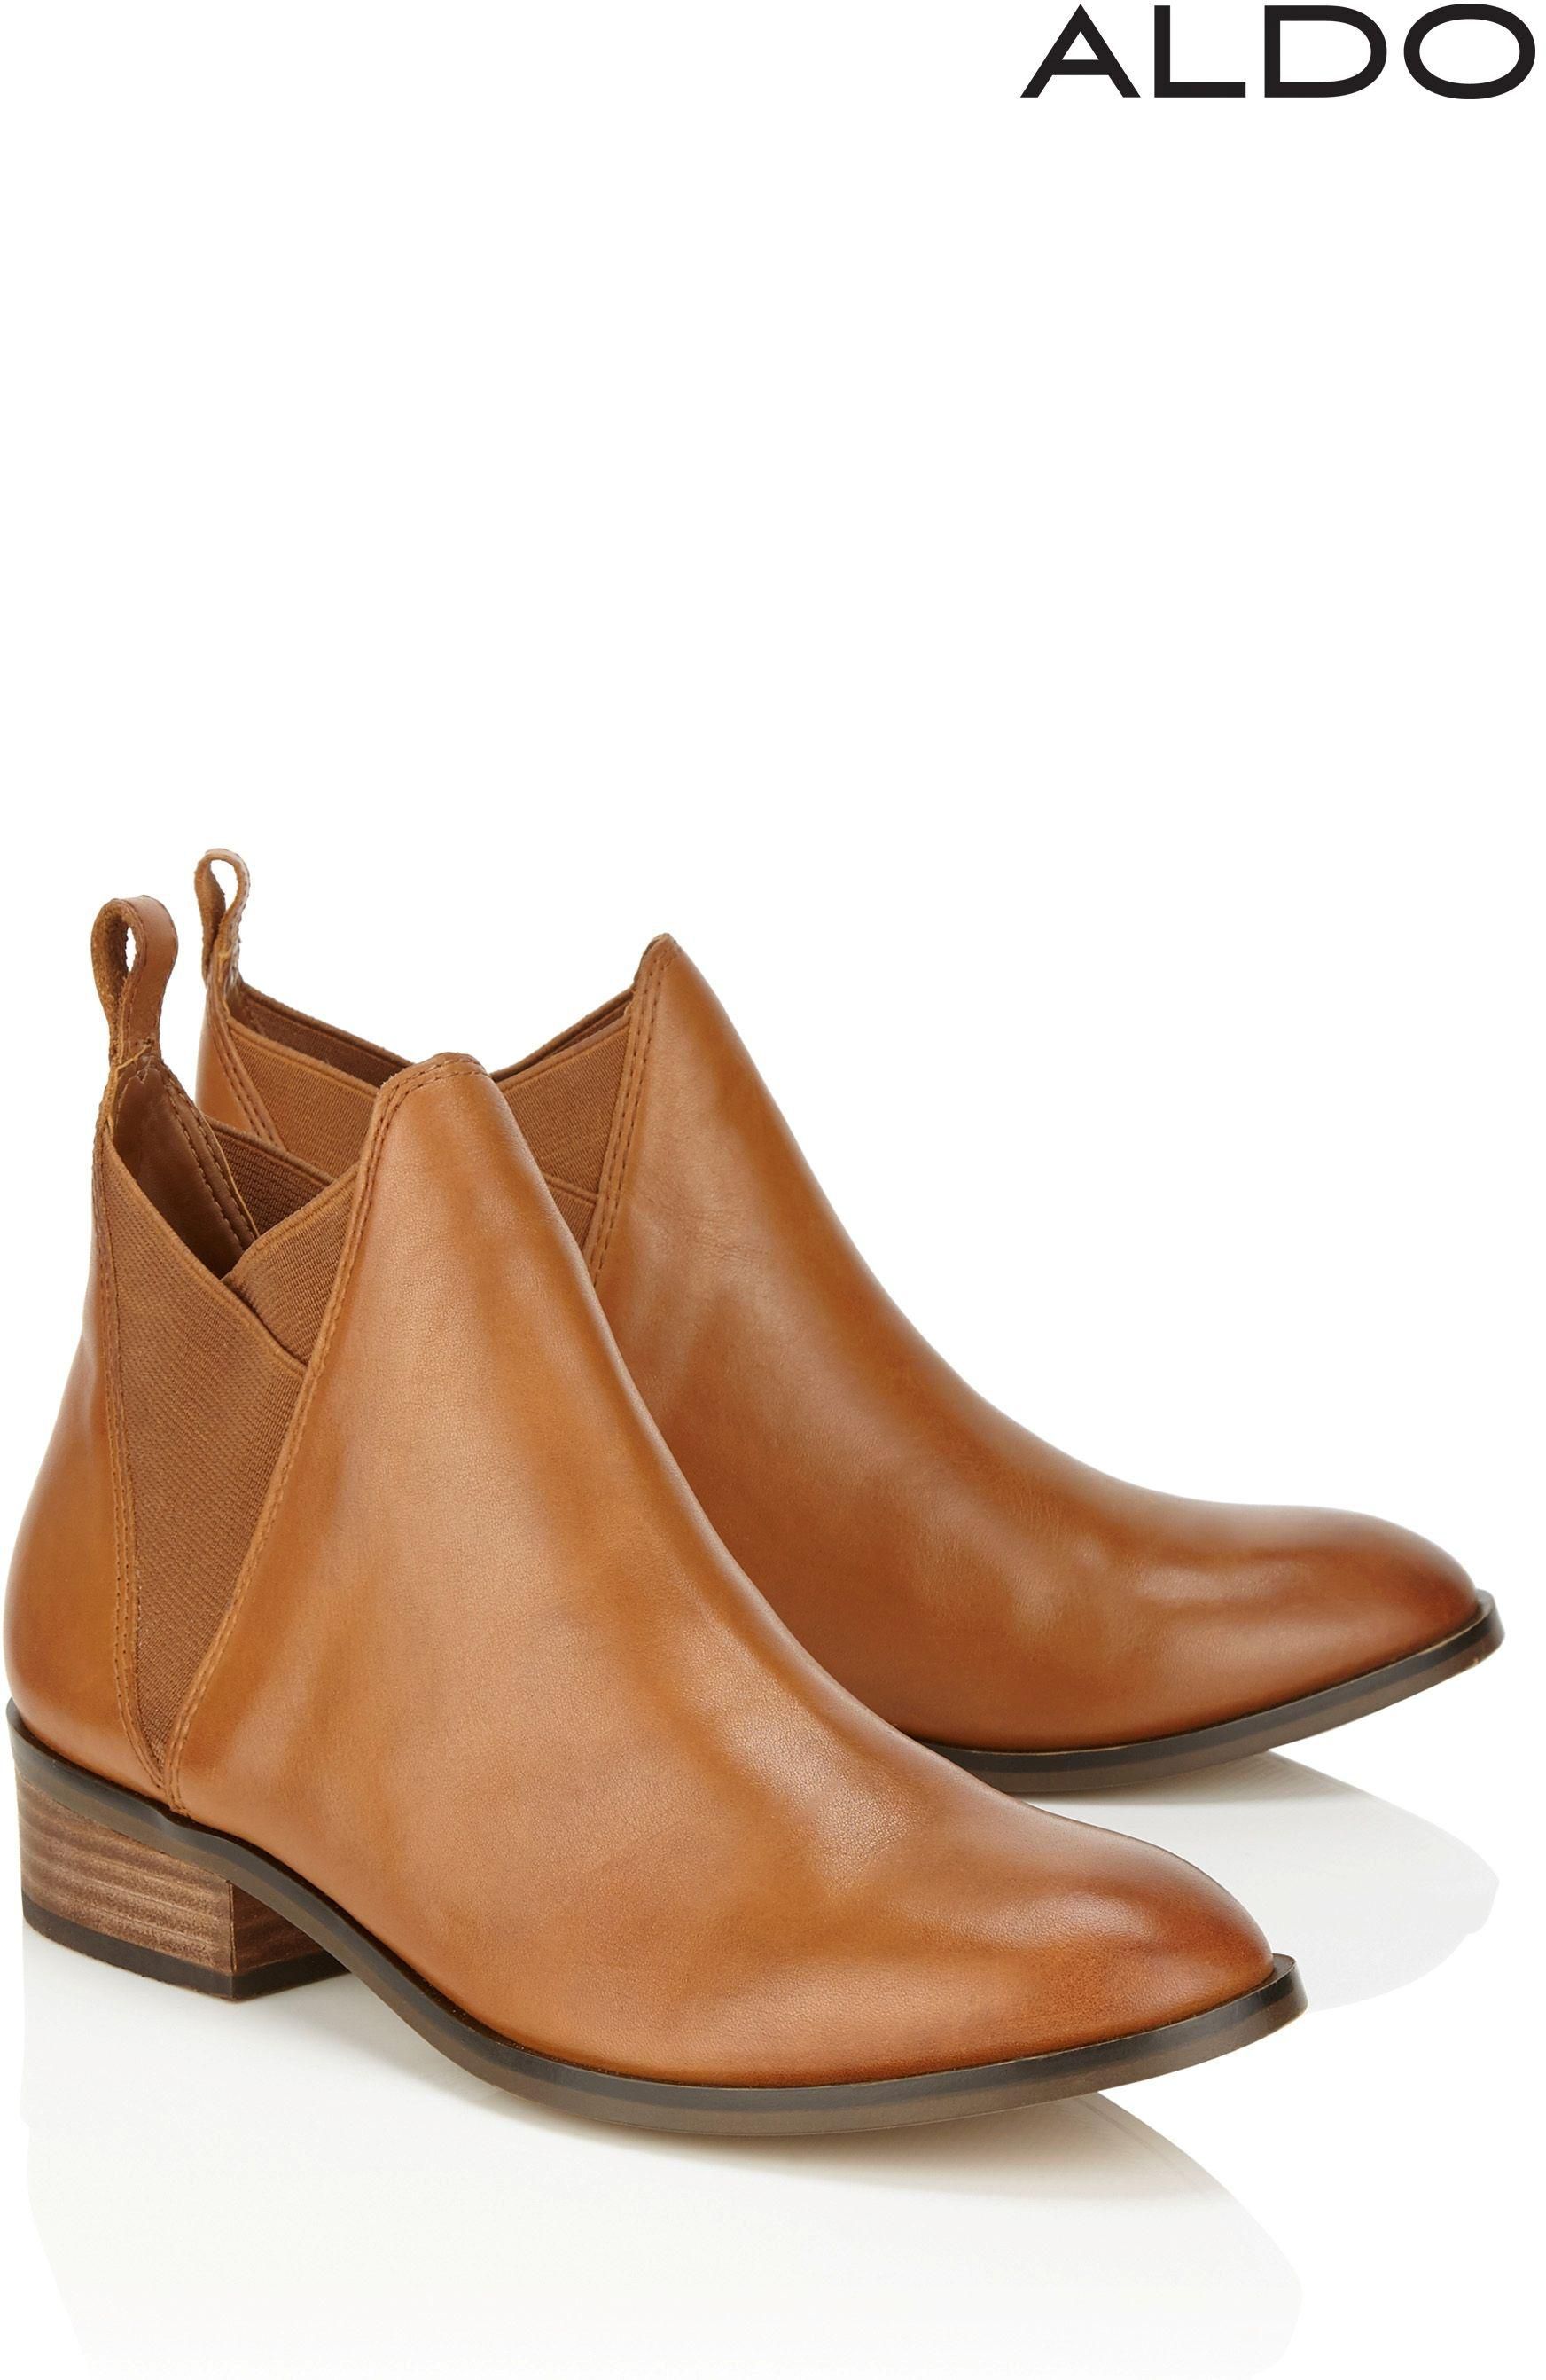 Aldo Flat Leather Ankle Boots